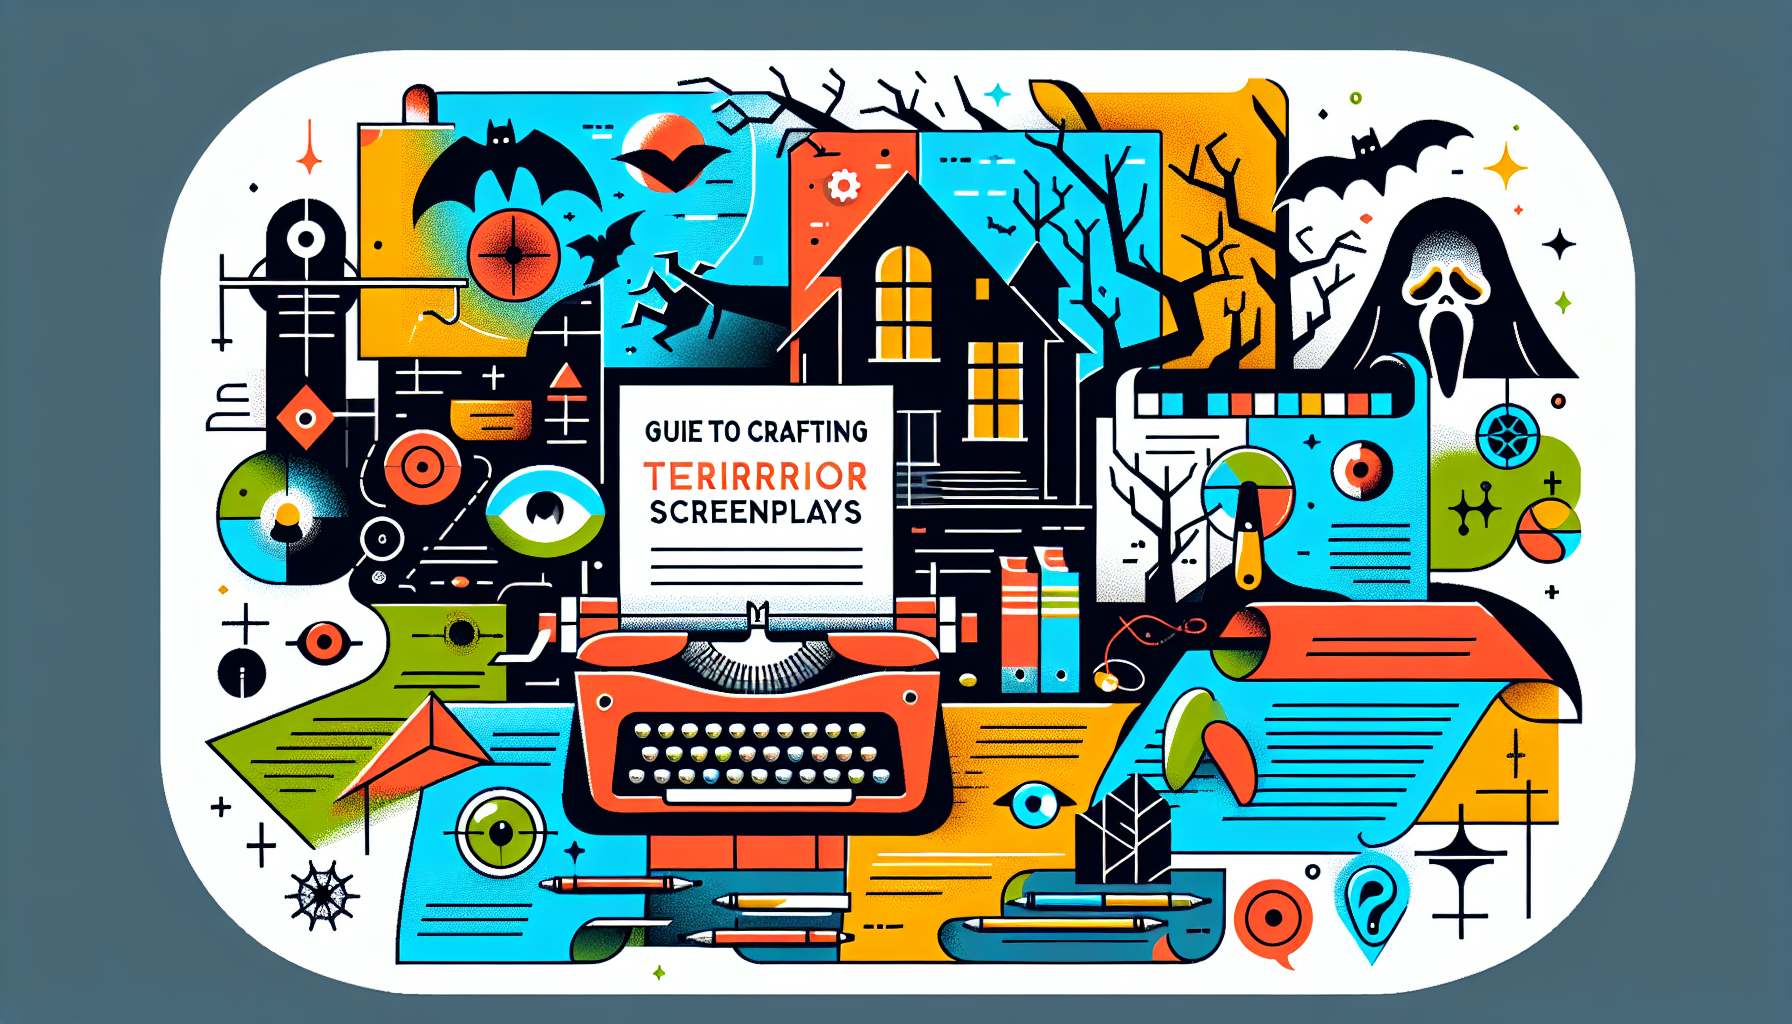 An illustrative representation of a modern and colorful guide for crafting terrifying horror screenplays. The image features elements of scriptwriting, such as a typewriter, scattered screenplay sheets, and symbolic horror genre representations like shadows, eerie-looking trees, and an old, haunted house. The design style should be crisp and vibrant, using a plethora of bold colors to highlight different components of the image, while also creating a balanced contrast to the horror elements.